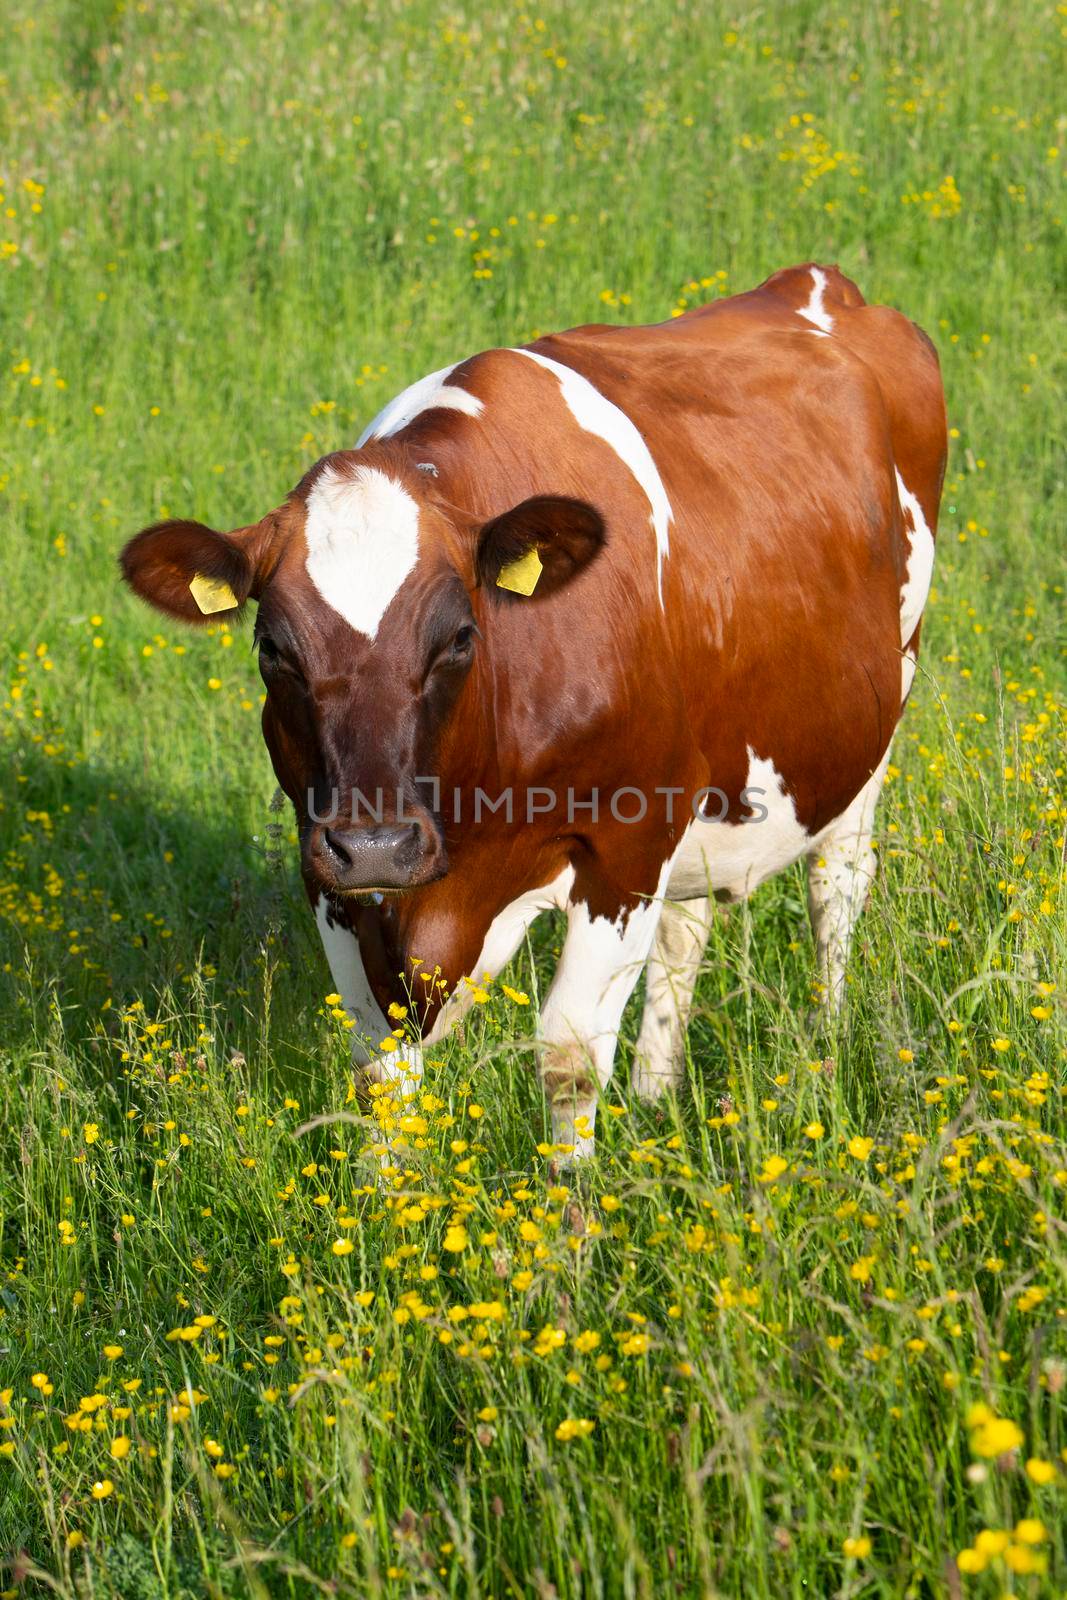 red spotted cow in green grassy summer meadow with yellow flowers in the centre of the netherlands